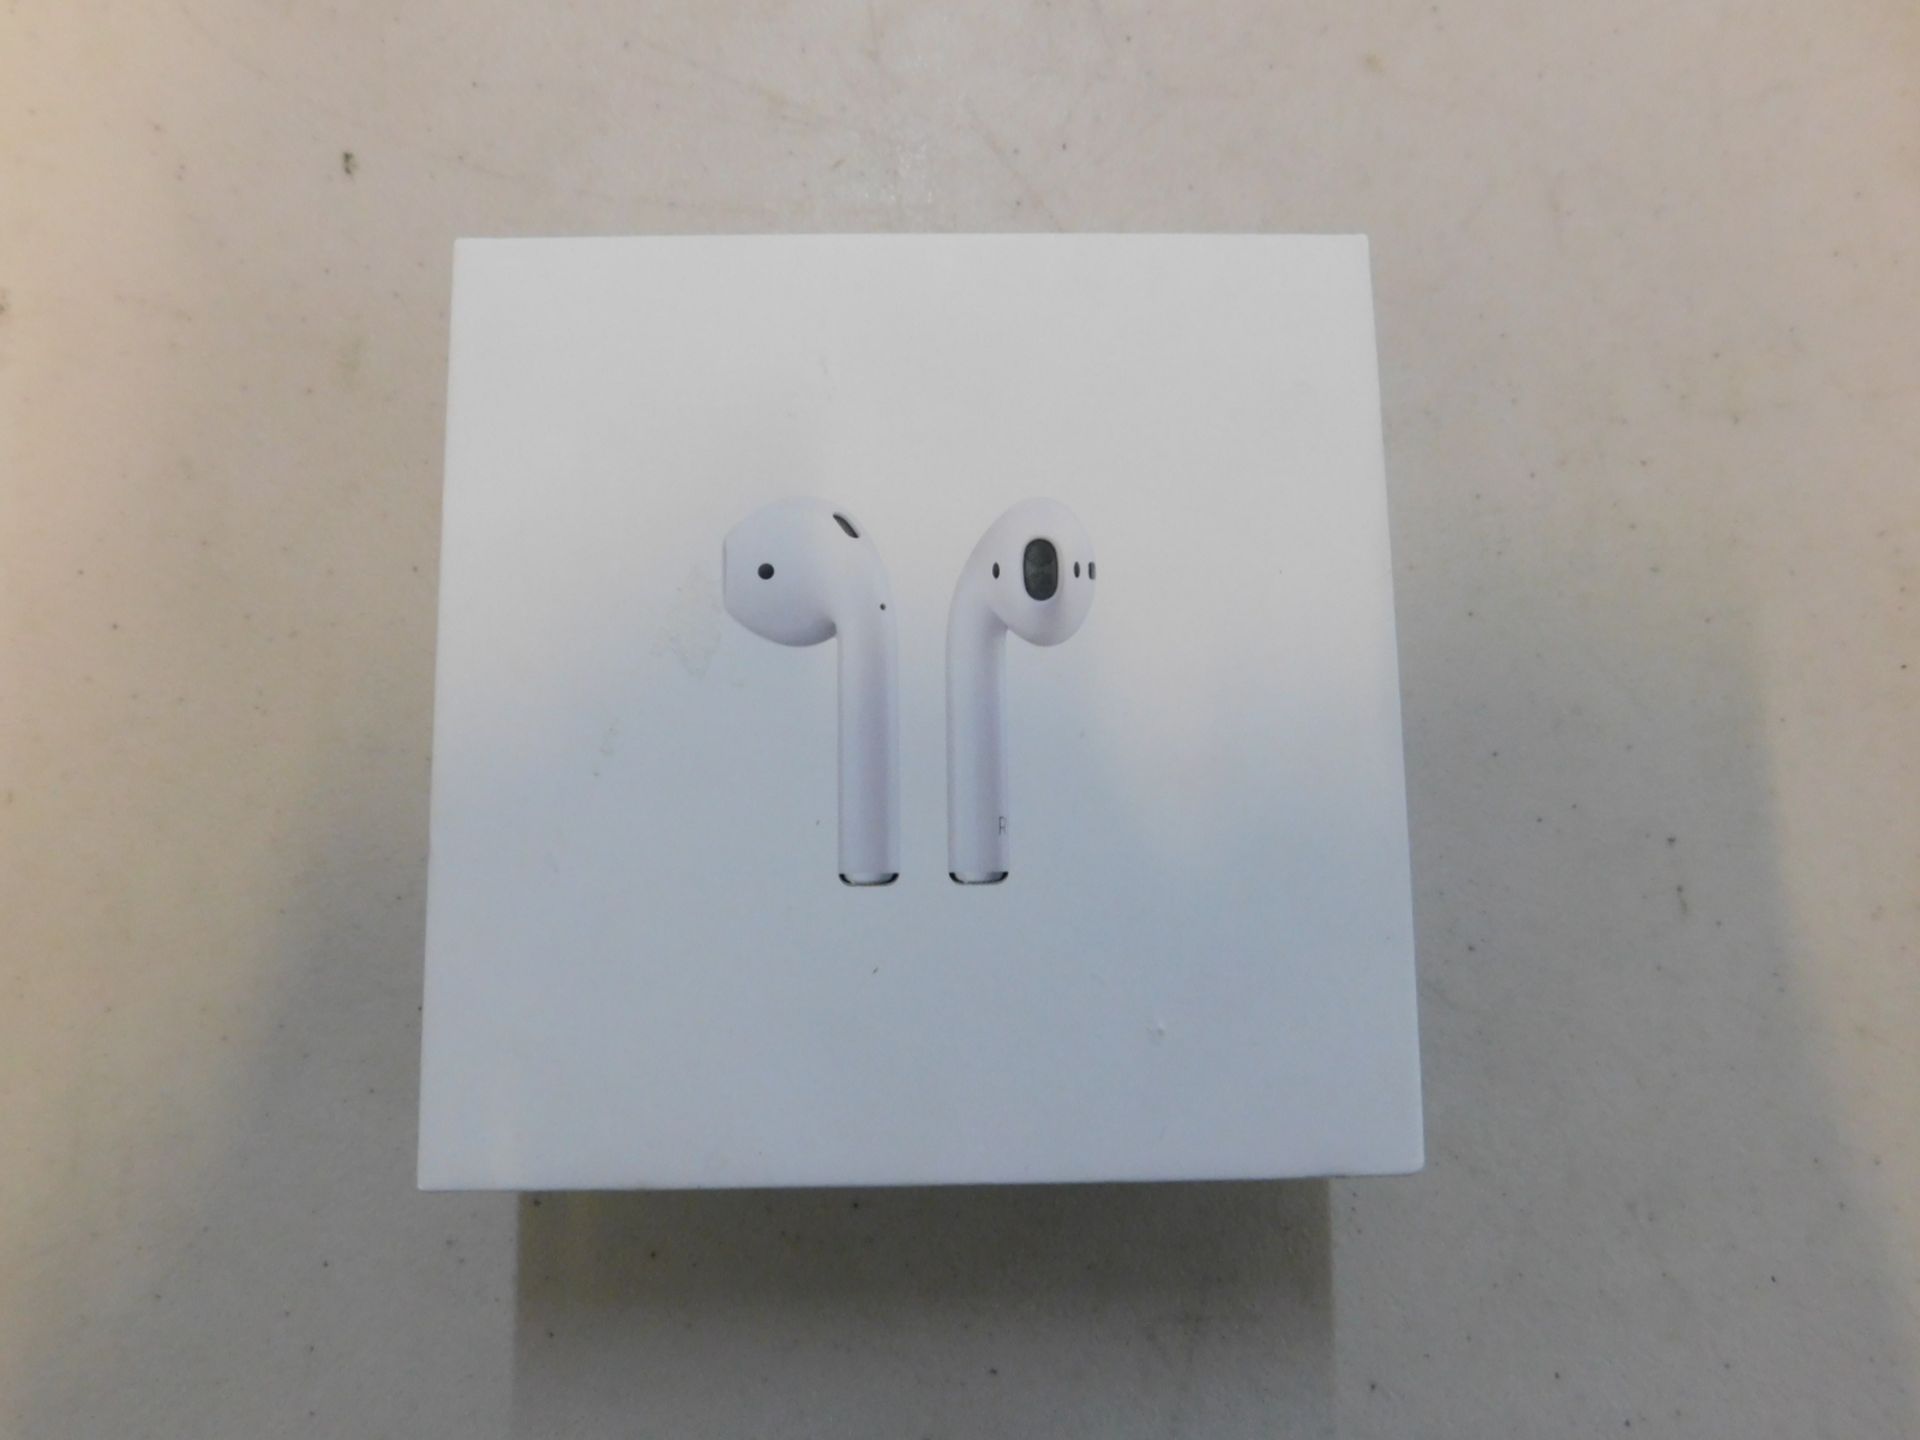 1 BOXED PAIR OF APPLE AIRPODS 2 BLUETOOTH EARPHONES WITH WIRELESS CHARGING CASE RRP Â£199.99